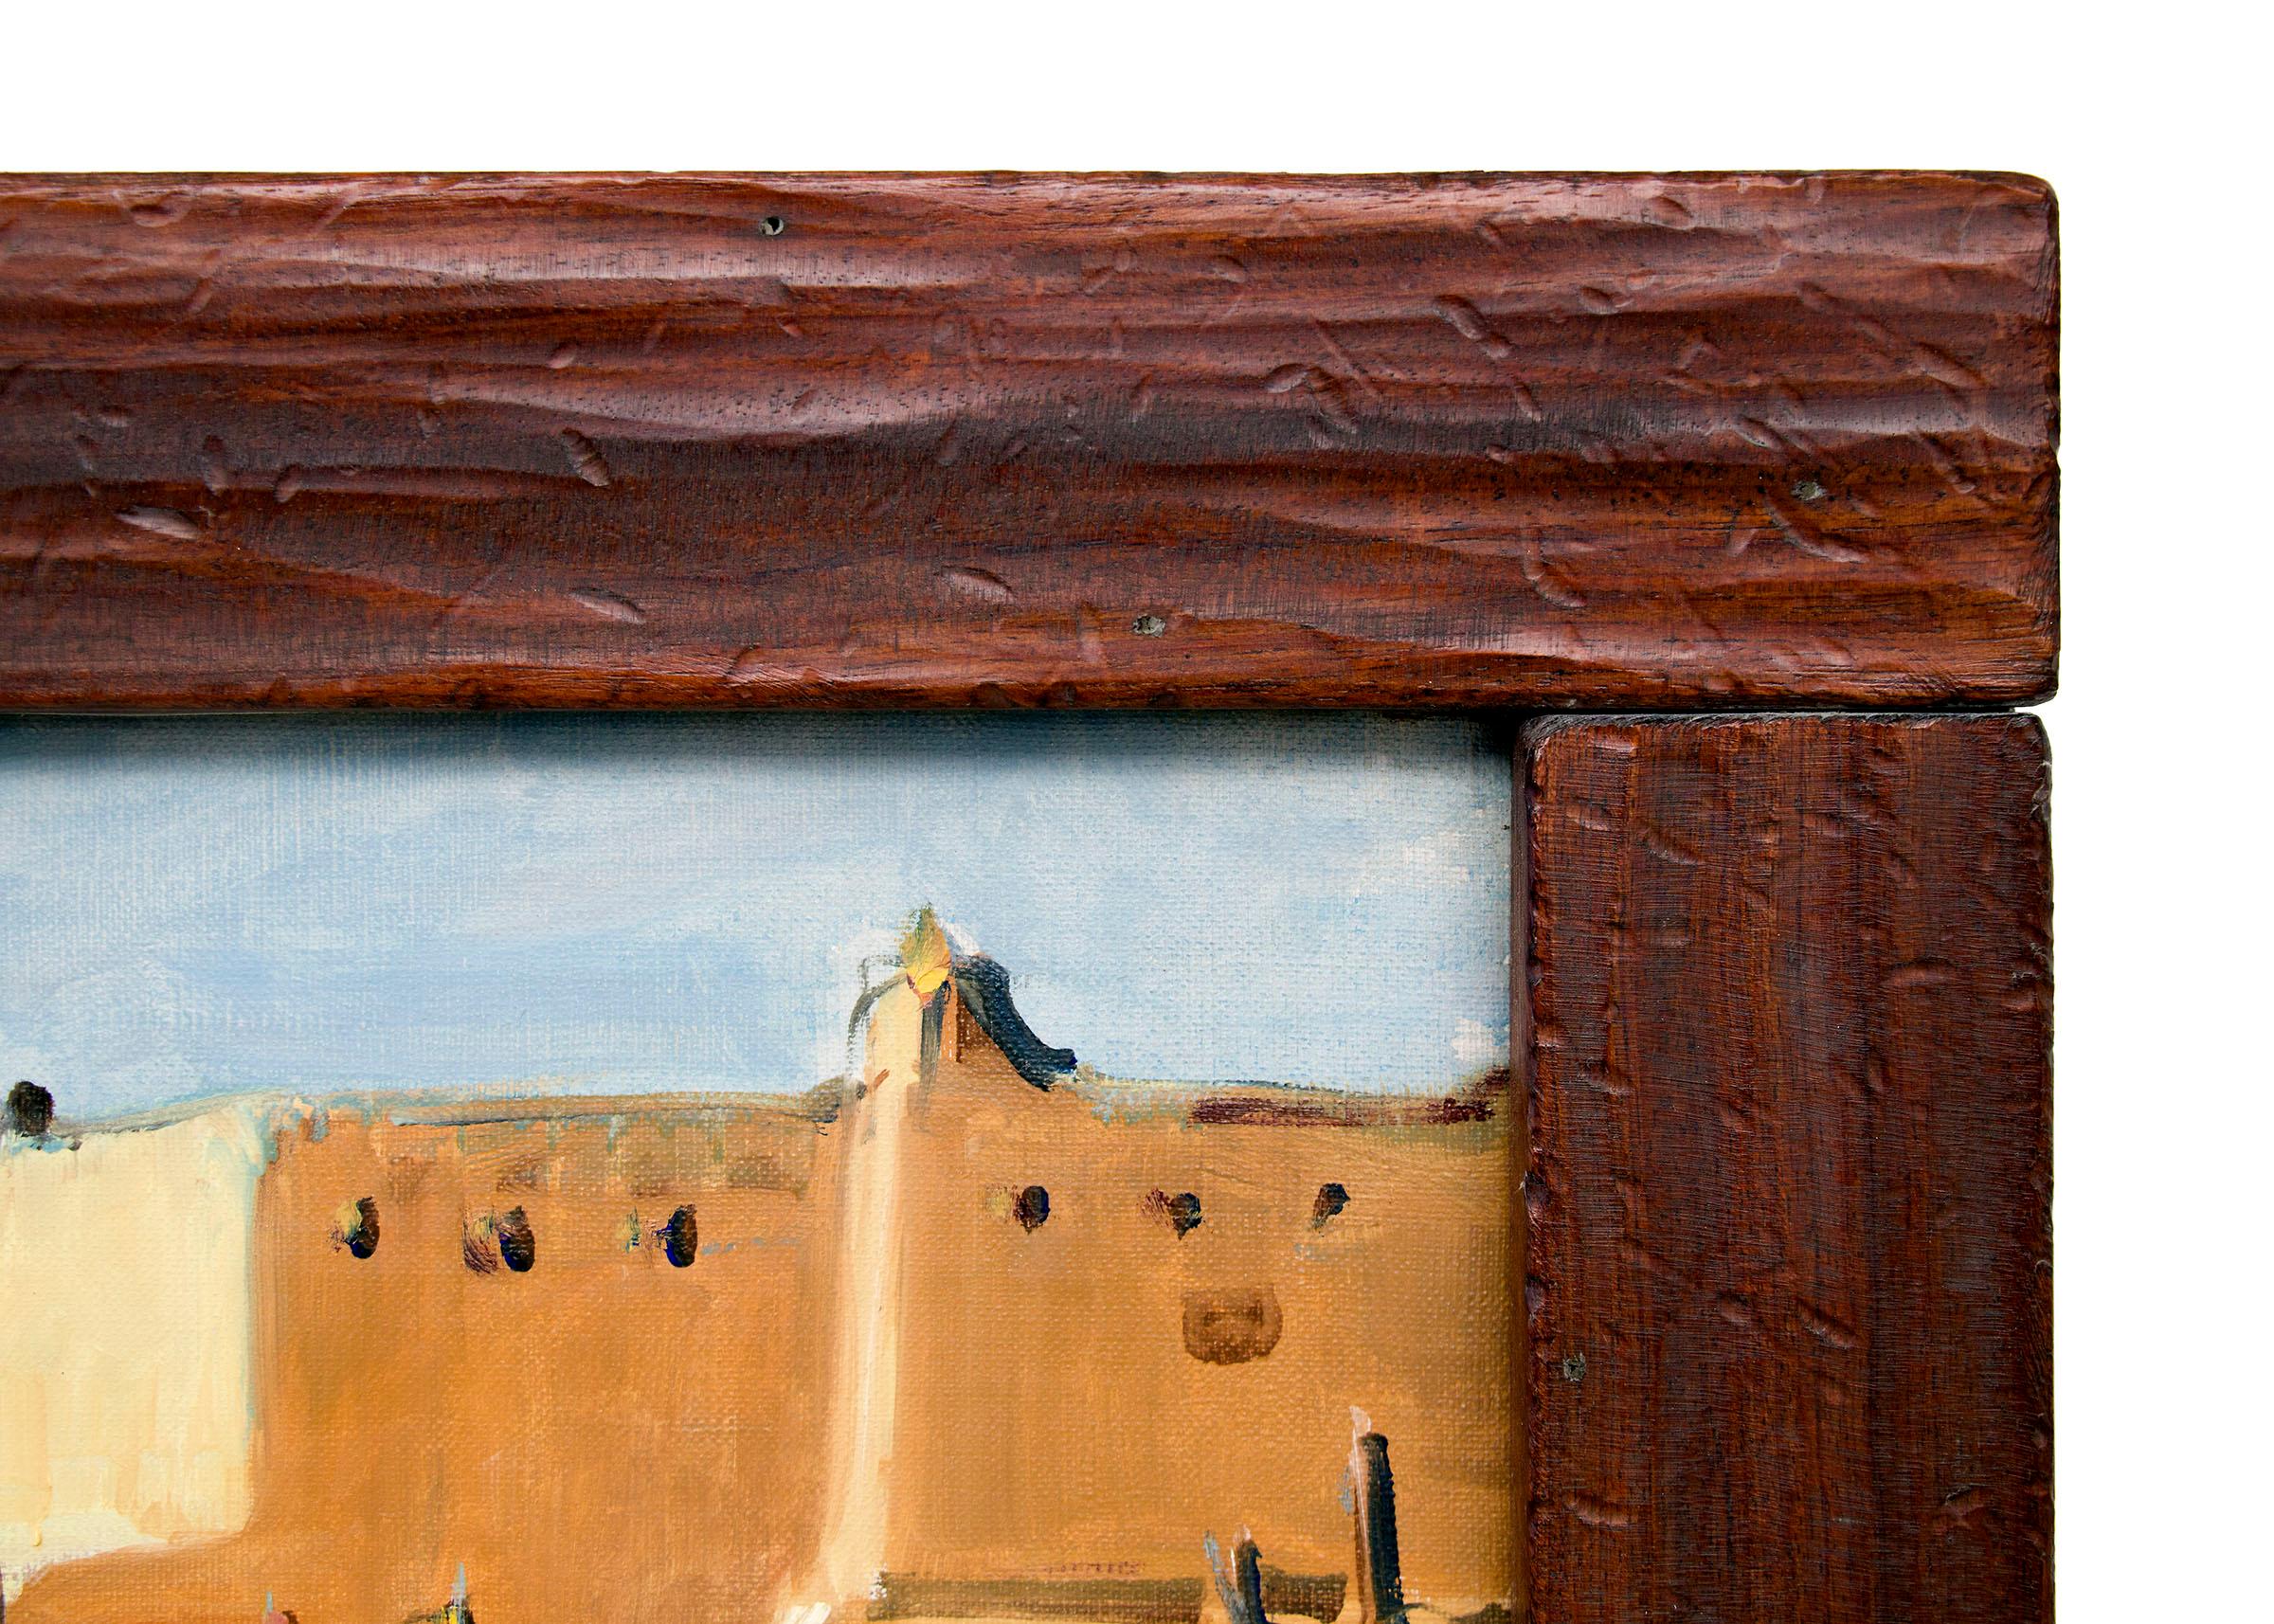 Original 20th century oil painting by Wolfgang Pogzeba (1936-1982) with Native American figures standing in bright blankets with adobe buildings in the background at Taos Pueblo, New Mexico.   Presented in a custom hardwood frame, outer dimensions